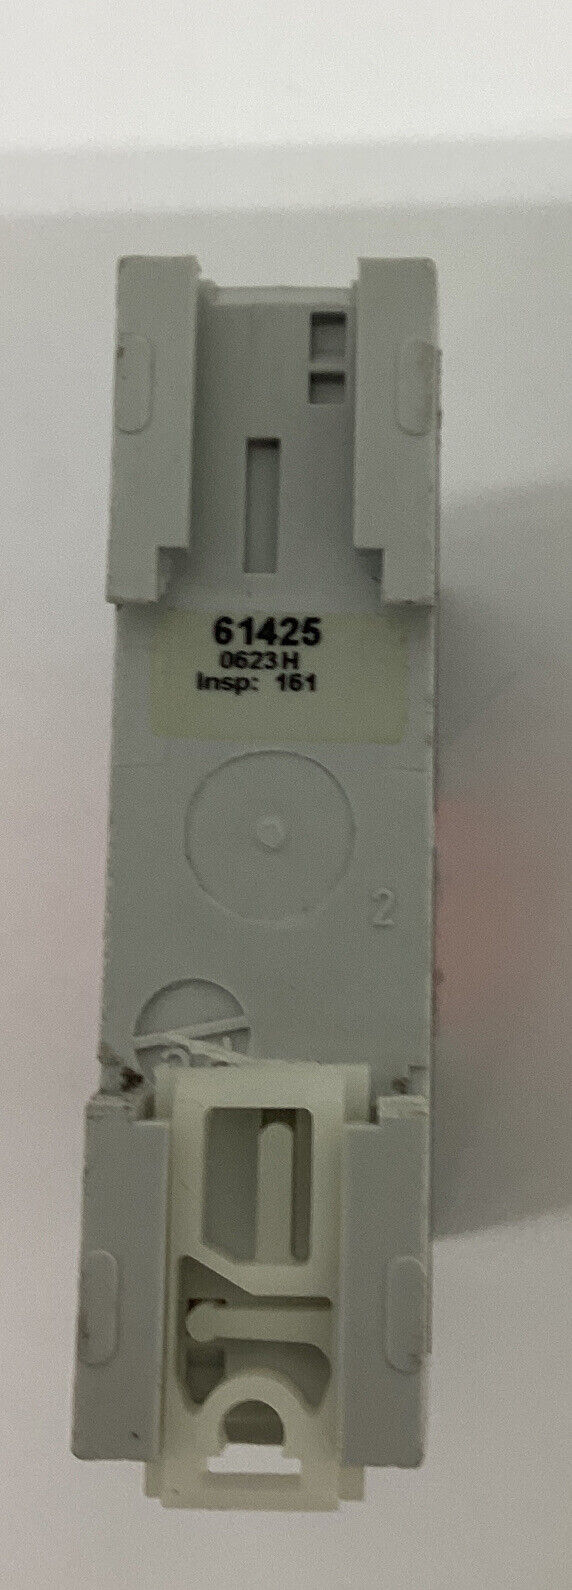 Banner  IM-T-9A  Machine Safety Relay  24VDC  100MA (CL258)